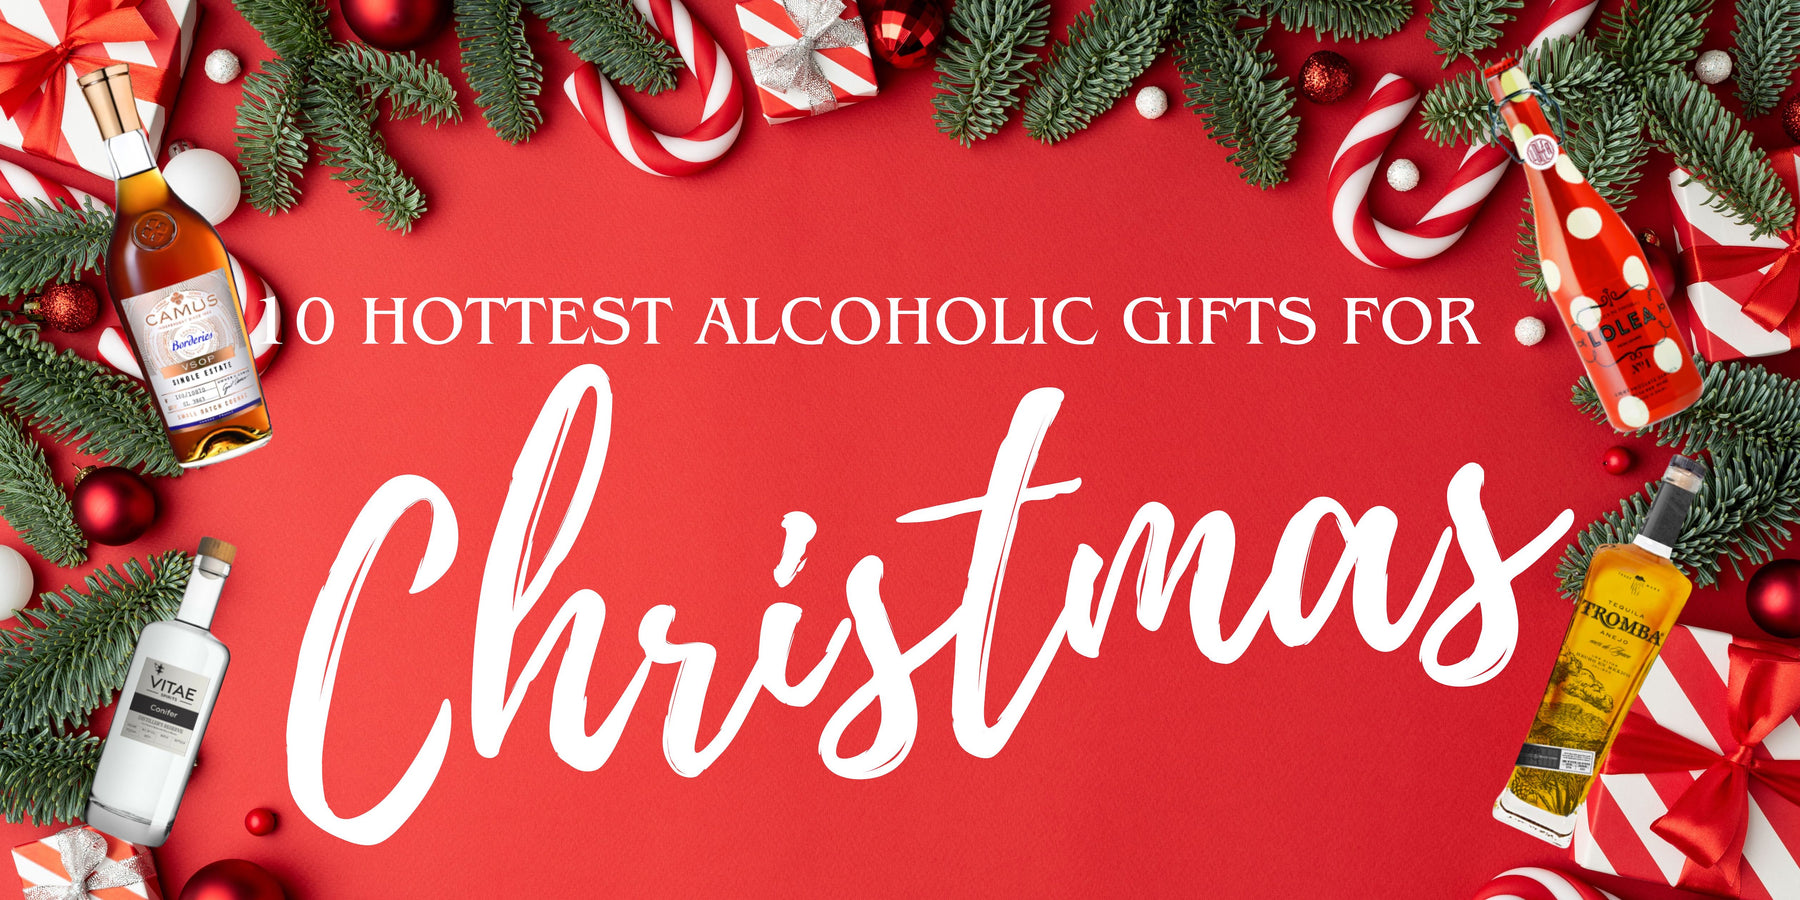 The 10 Hottest Alcoholic Christmas Gifts